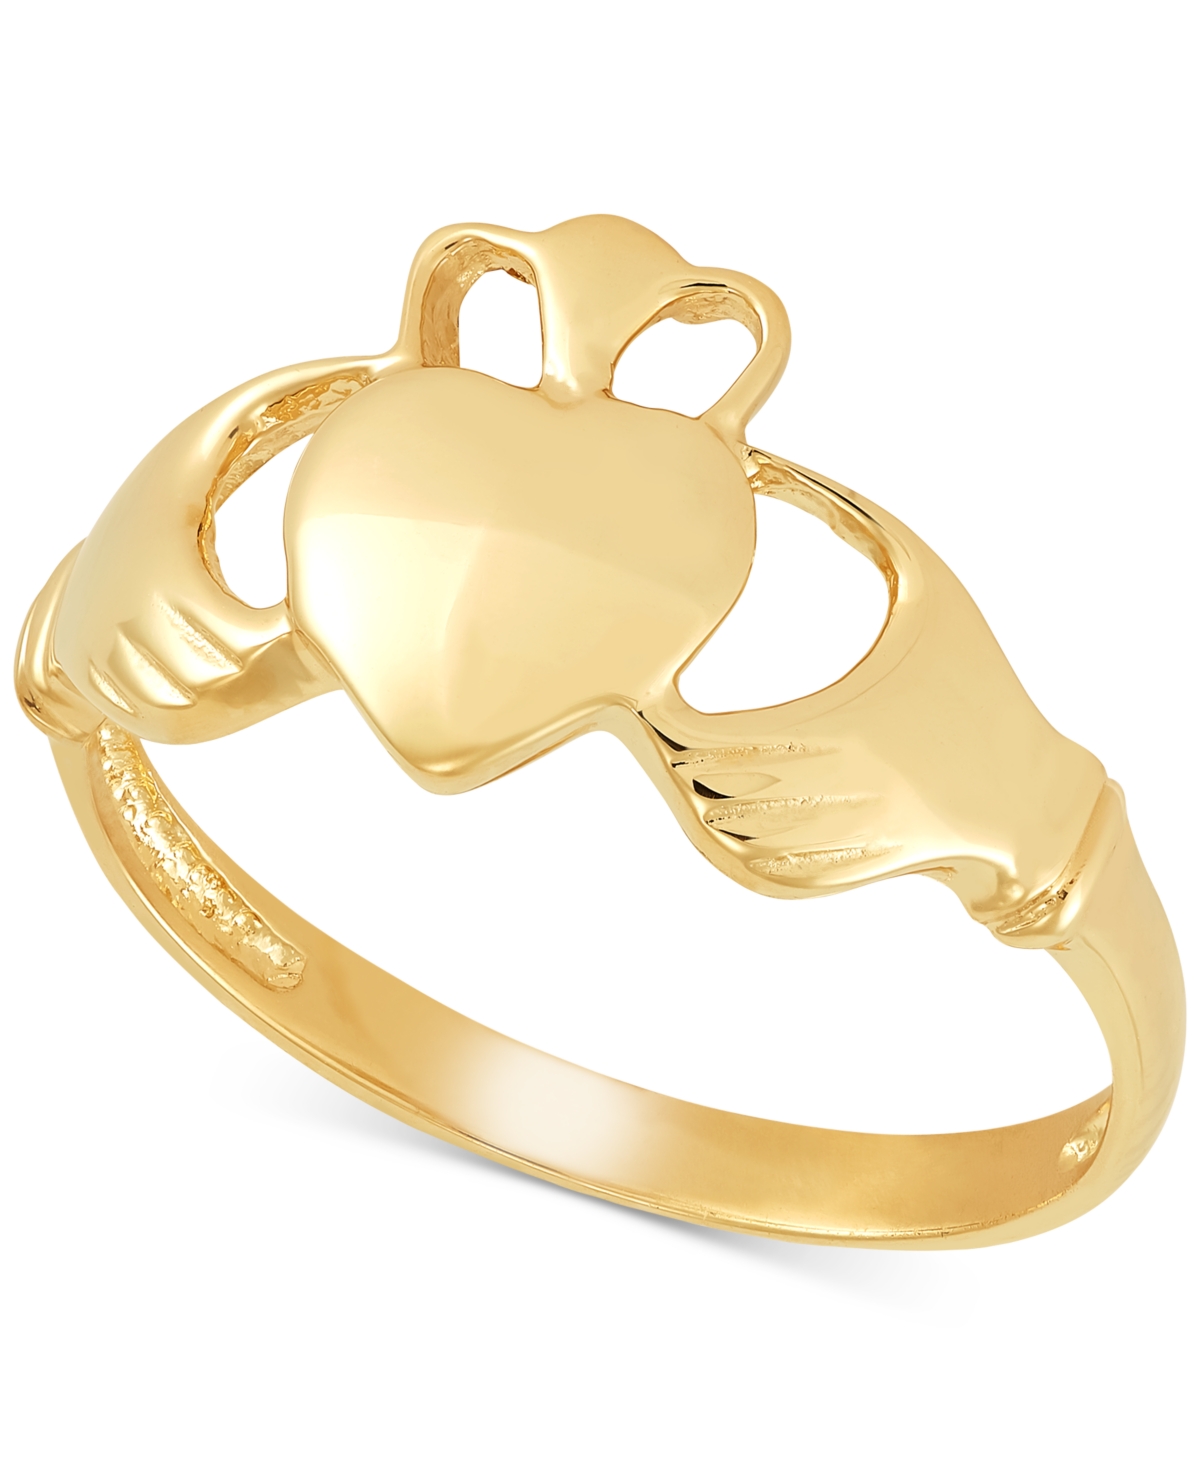 Claddagh Ring in 14k Gold - Yellow Gold